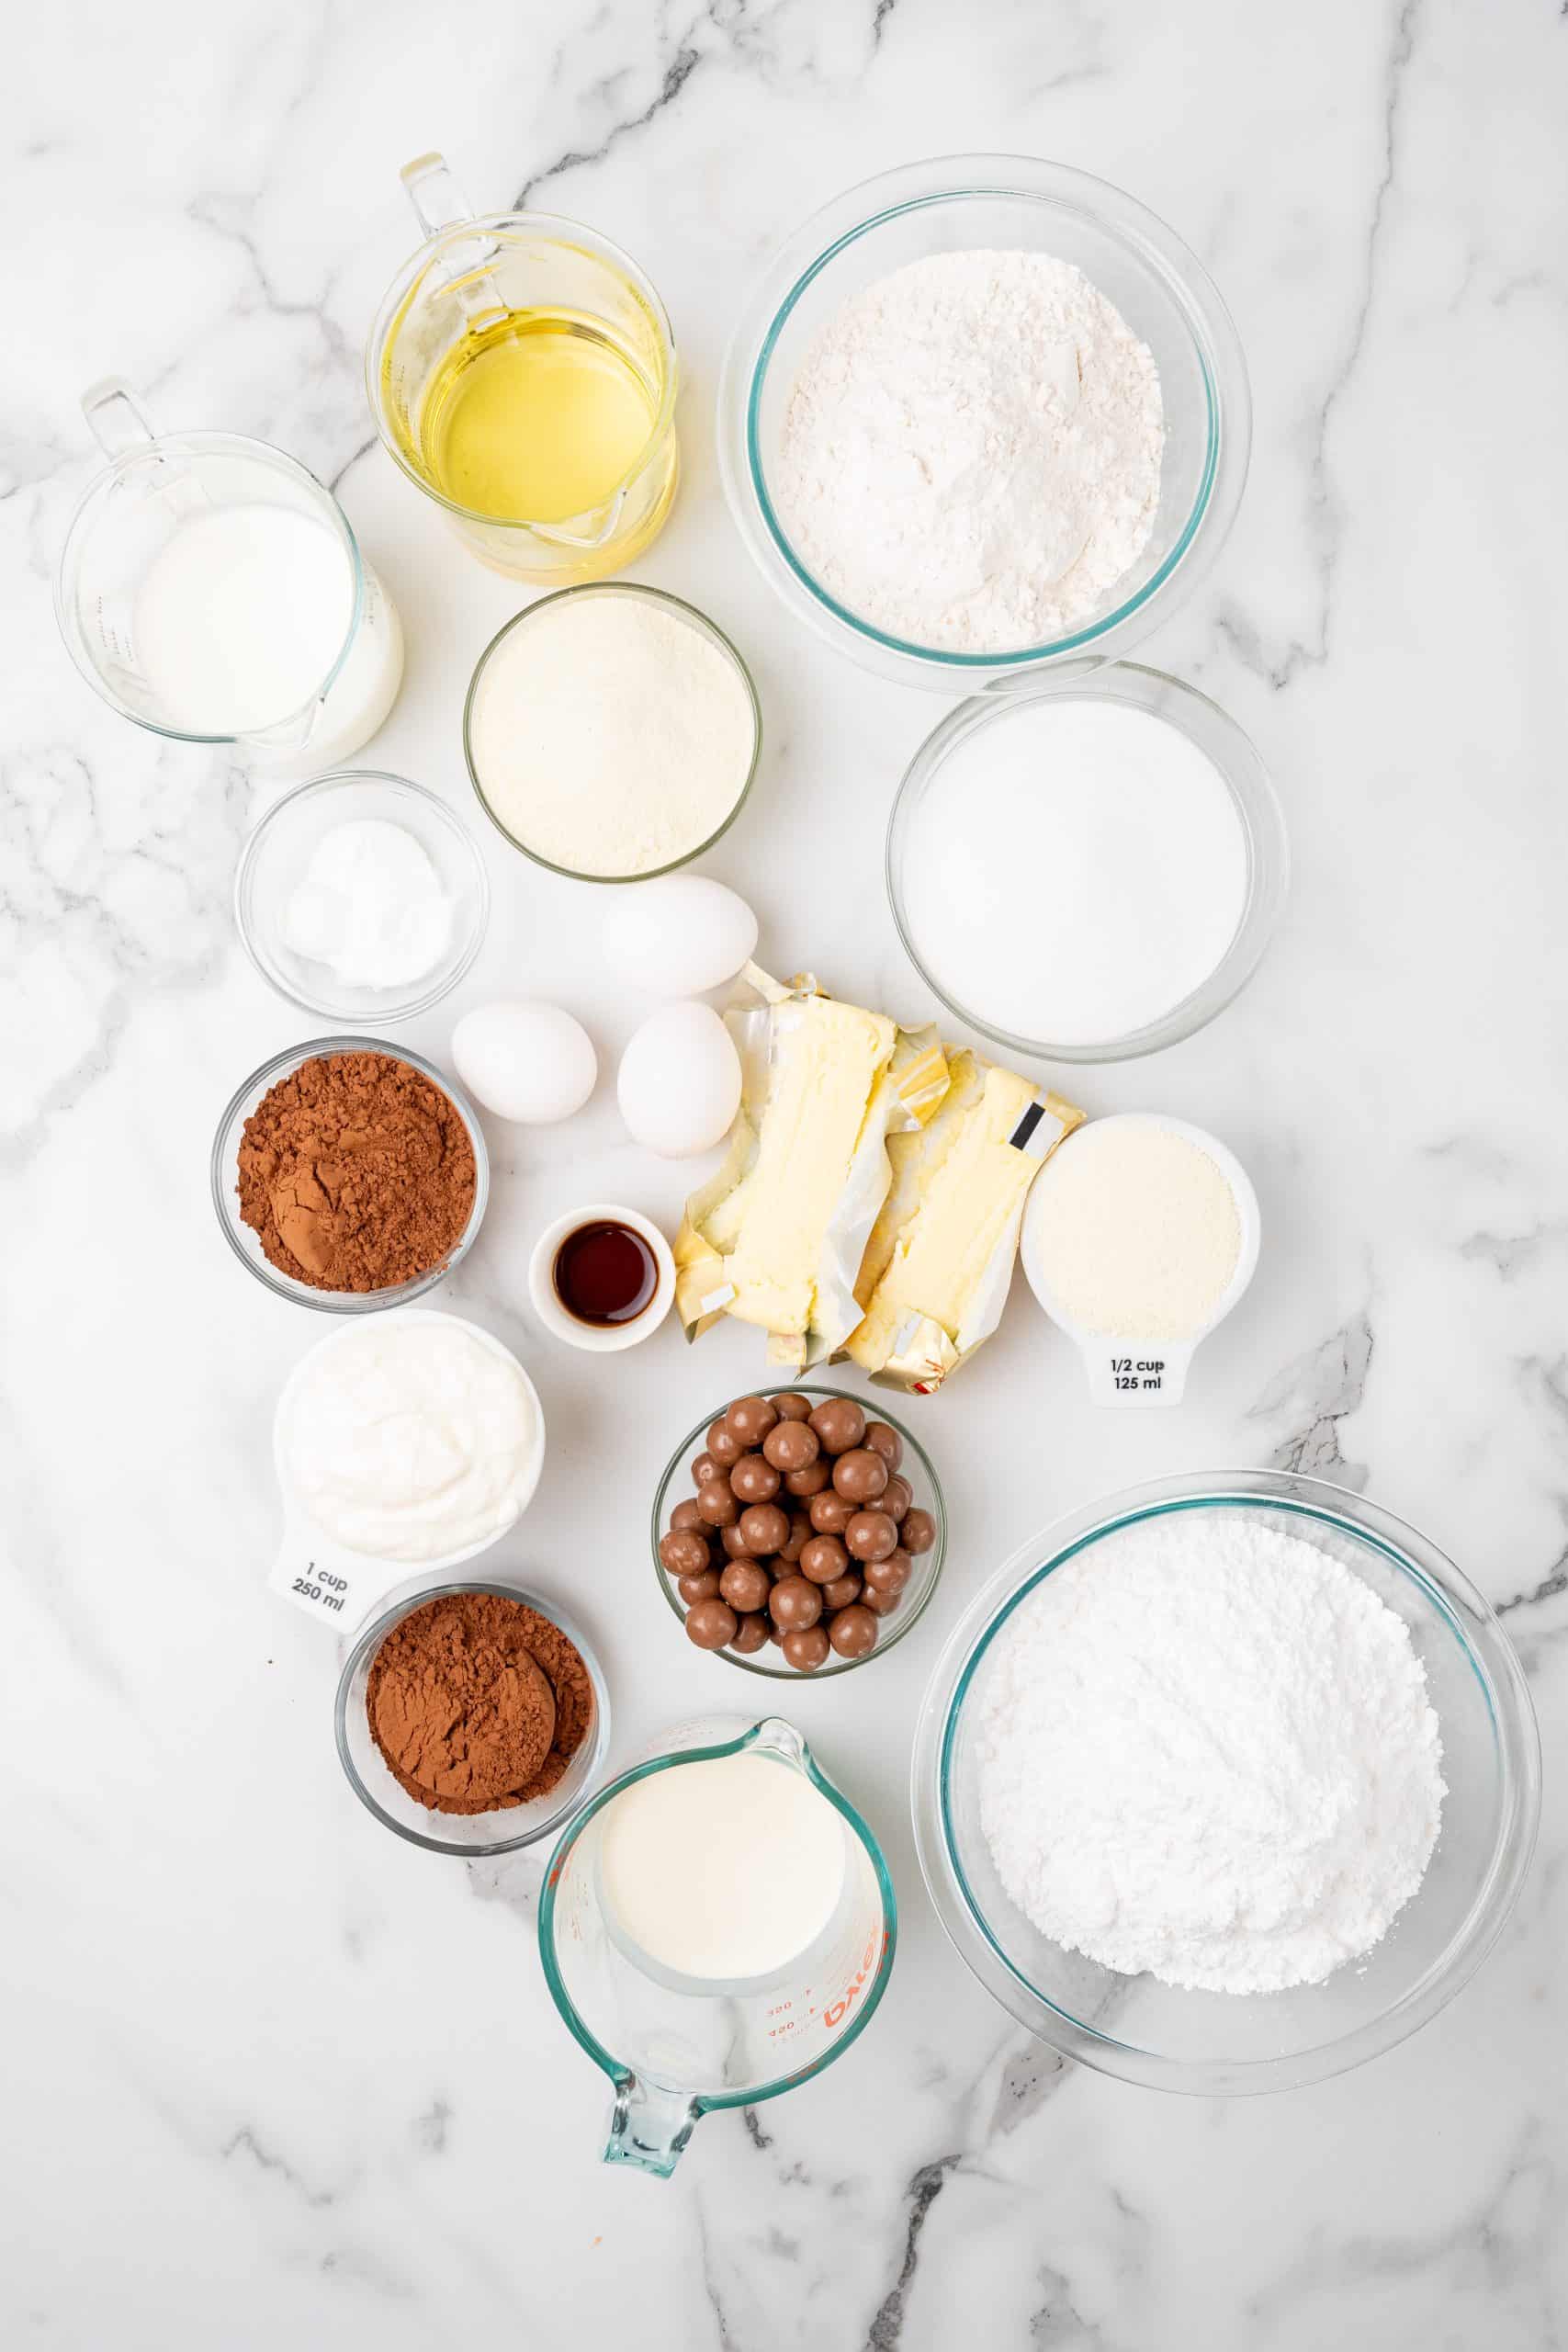 an overhead image showing the measured ingredients needed to make a chocolate malted cake recipe